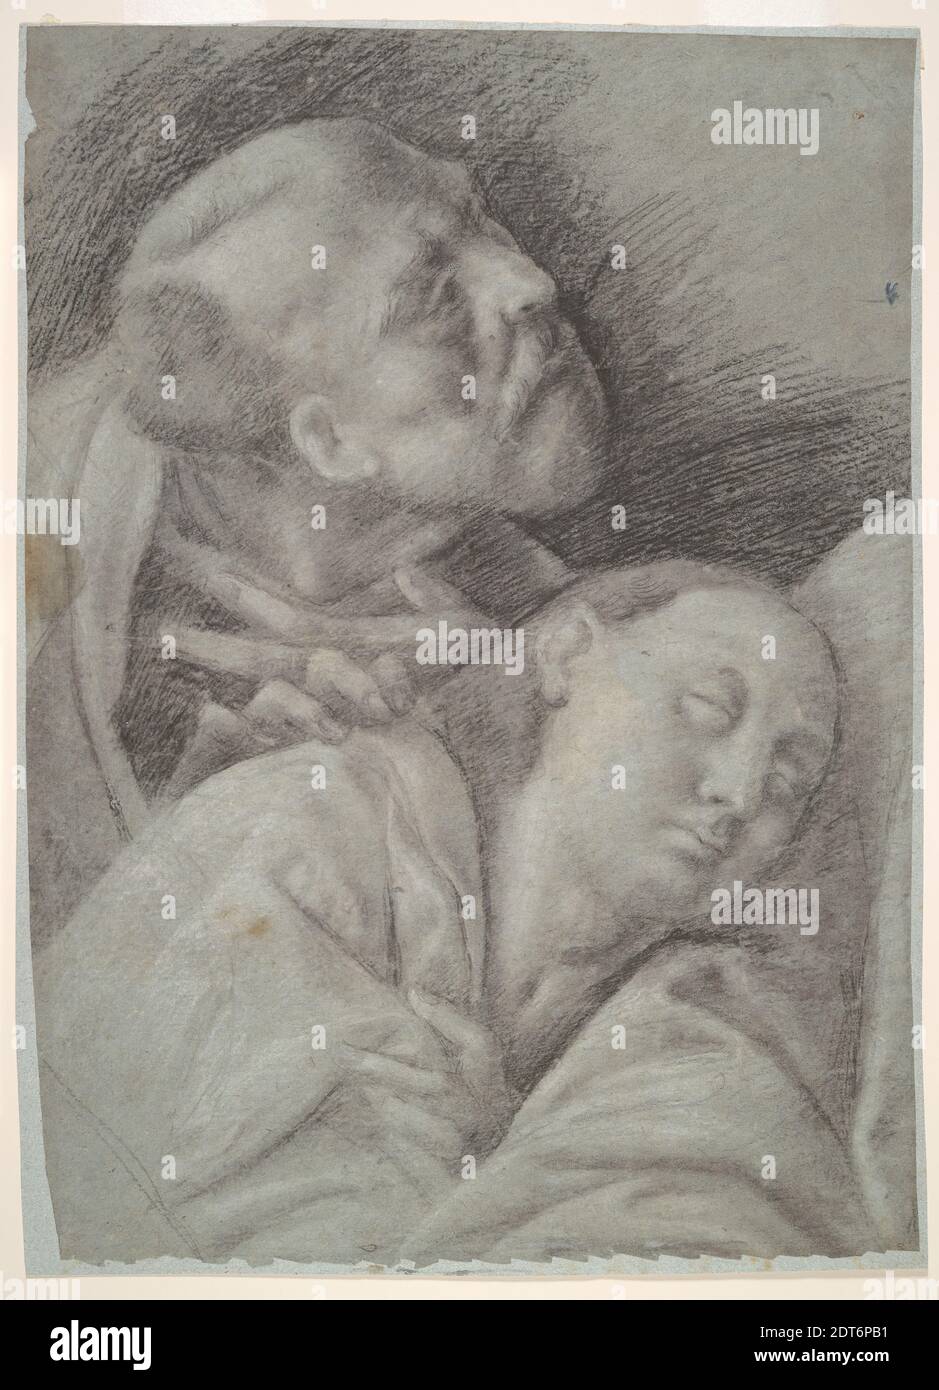 Artist: Bernardino Lanino, Italian, c.1509-c.1581, Artist, formerly attributed to and after: Gaudenzio Ferrari, Italian, 1470–1576, Two Apostles, study for The Last Supper, Black and white chalk on blue paper, 53.5 × 38.4 cm (21 1/16 × 15 1/8 in.), Bernardino Lanino worked in Milan and, like most artists of his time, fell under the spell of Leonardo da Vinci’s famous Last Supper. This drawing relates to Lanino’s own version of the subject in the church of San Nazzaro Maggiore. Like Leonardo, Lanino focused on a range of facial types and expressions, as is evident in this drawing of Saint Peter Stock Photo